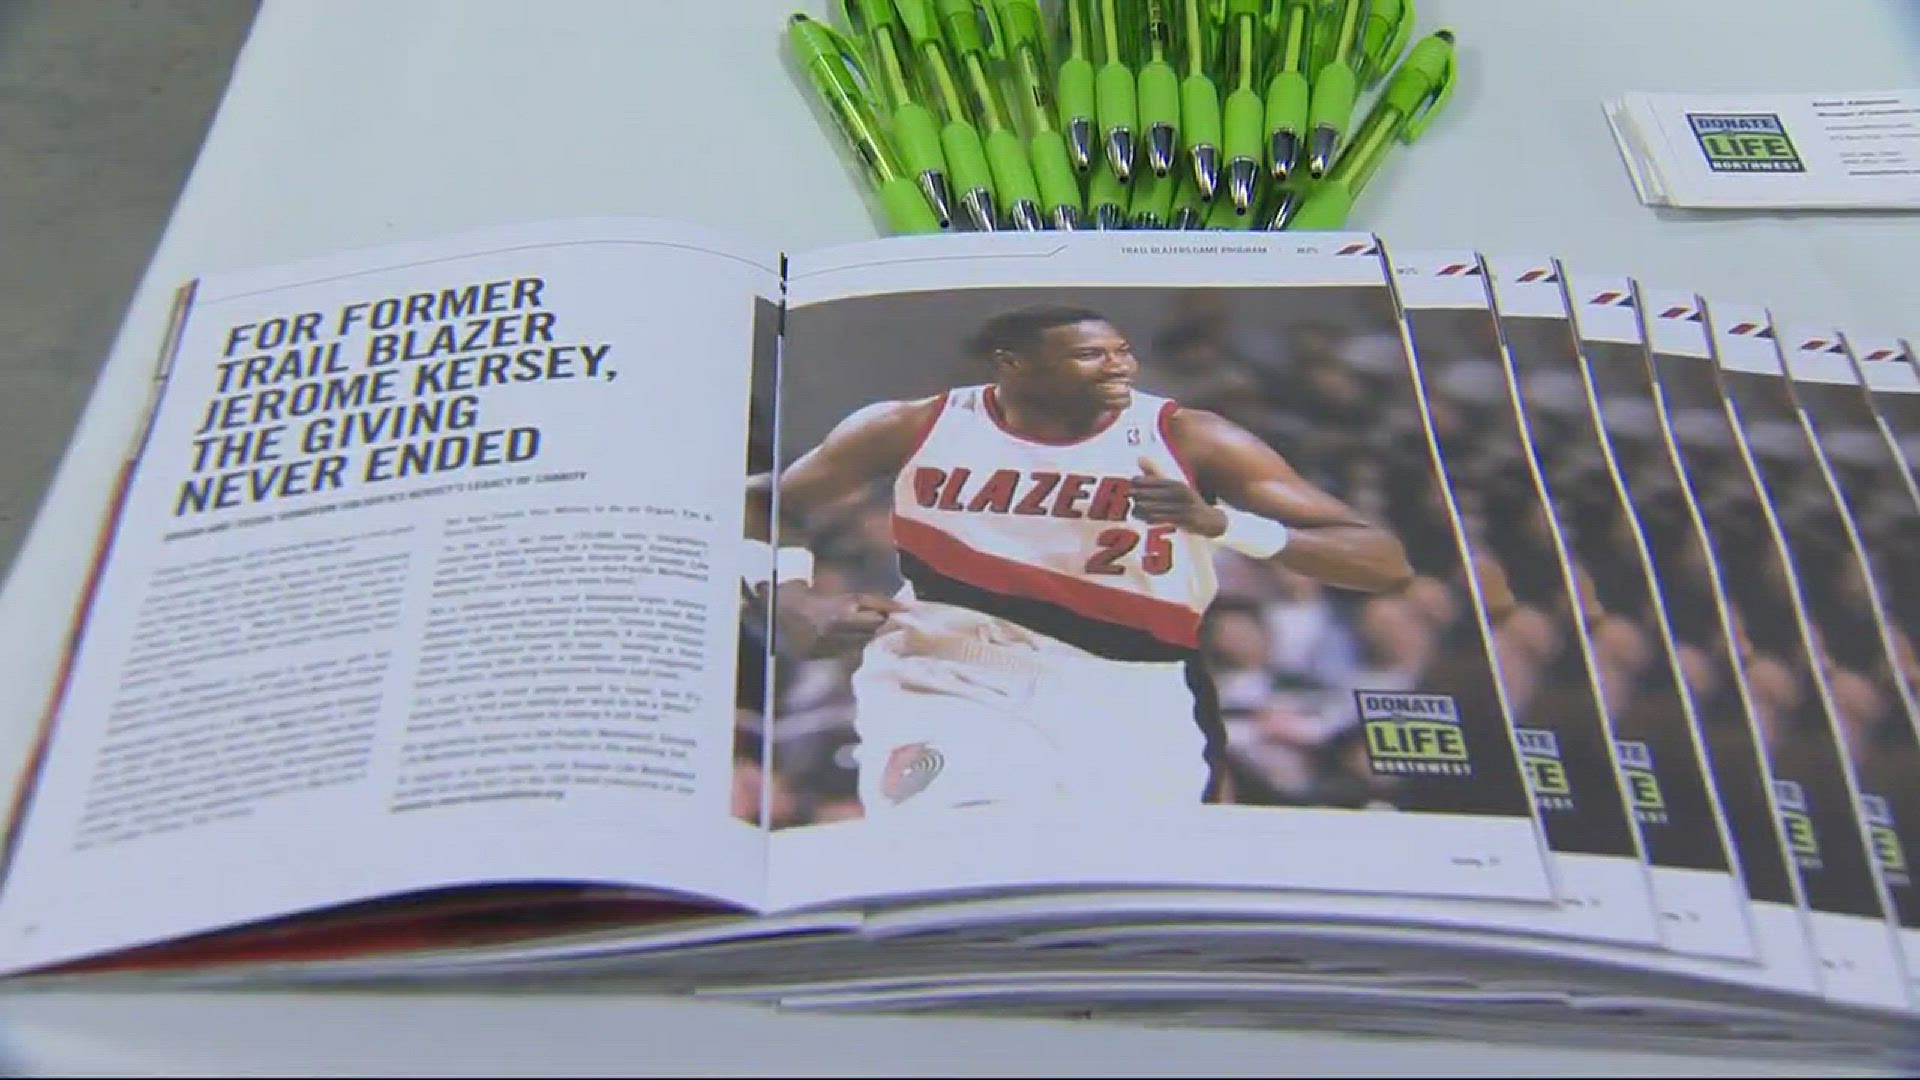 Jerome Kersey's legacy honored at Blazers game